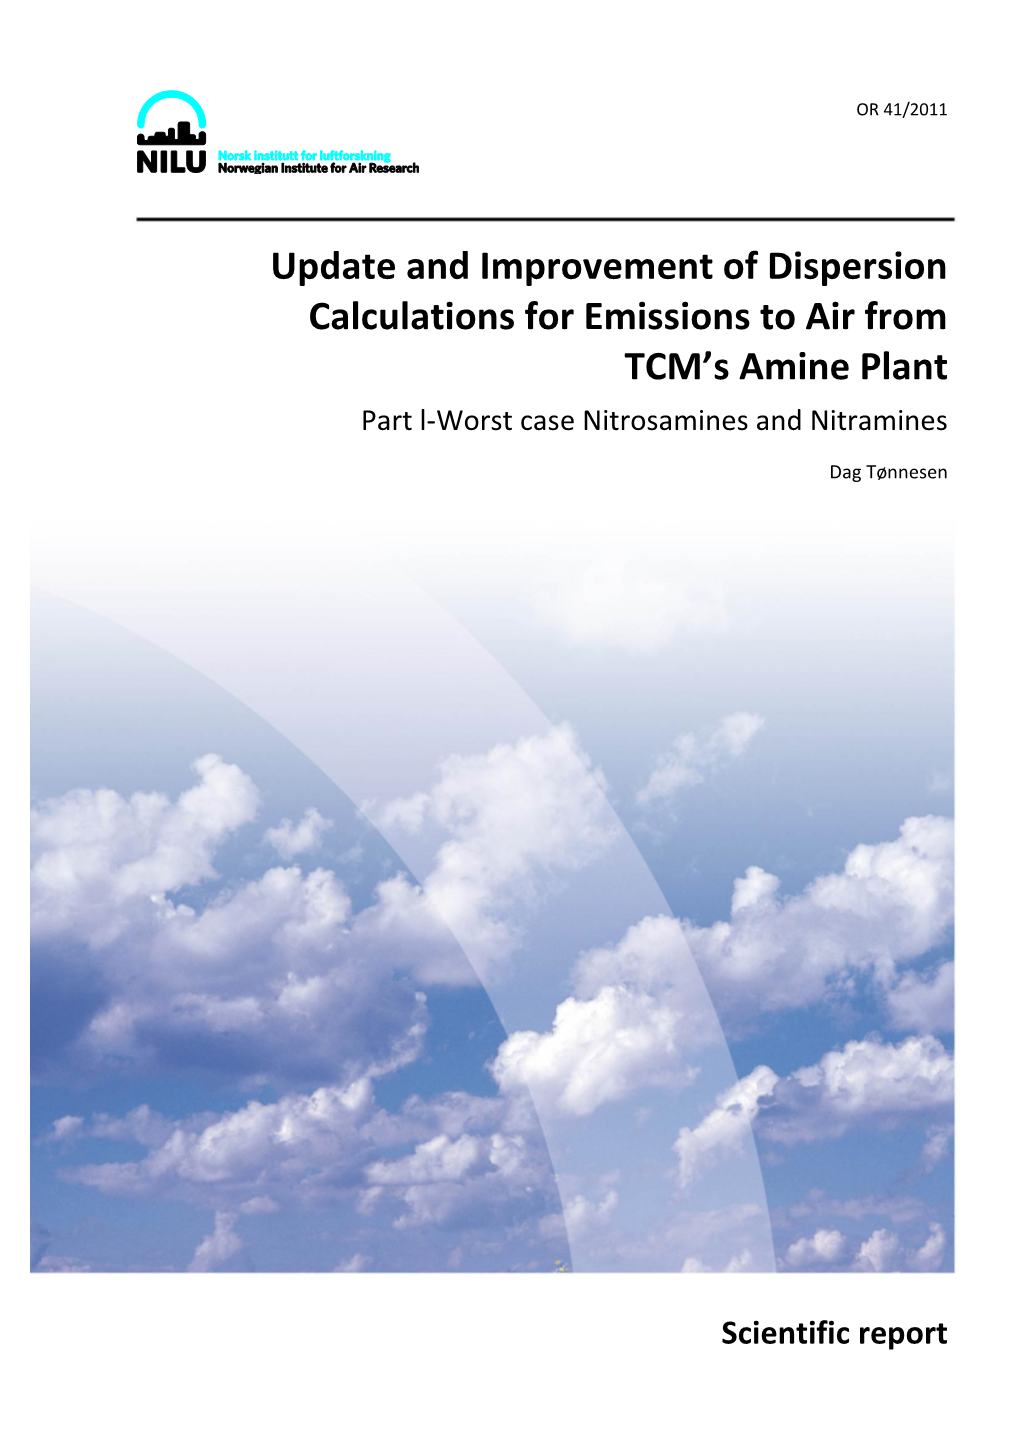 Update and Improvement of Dispersion Calculations for Emissions to Air from TCM’S Amine Plant Part L-Worst Case Nitrosamines and Nitramines